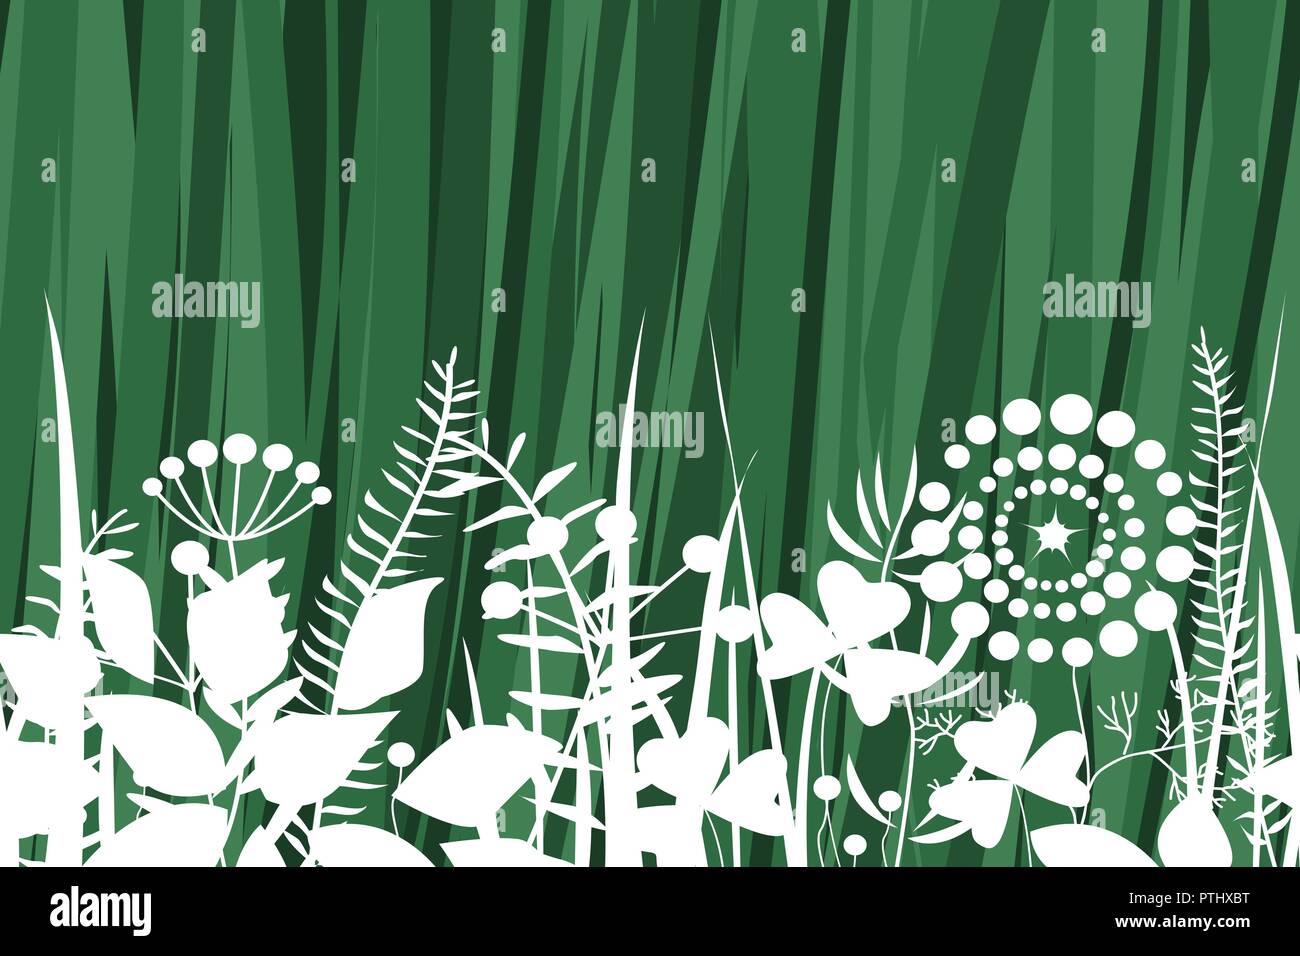 Vector eamless patter with grass silhouttes. Abstract grass texture. Floral summer background. Horizontal banner leaves texture Stock Vector